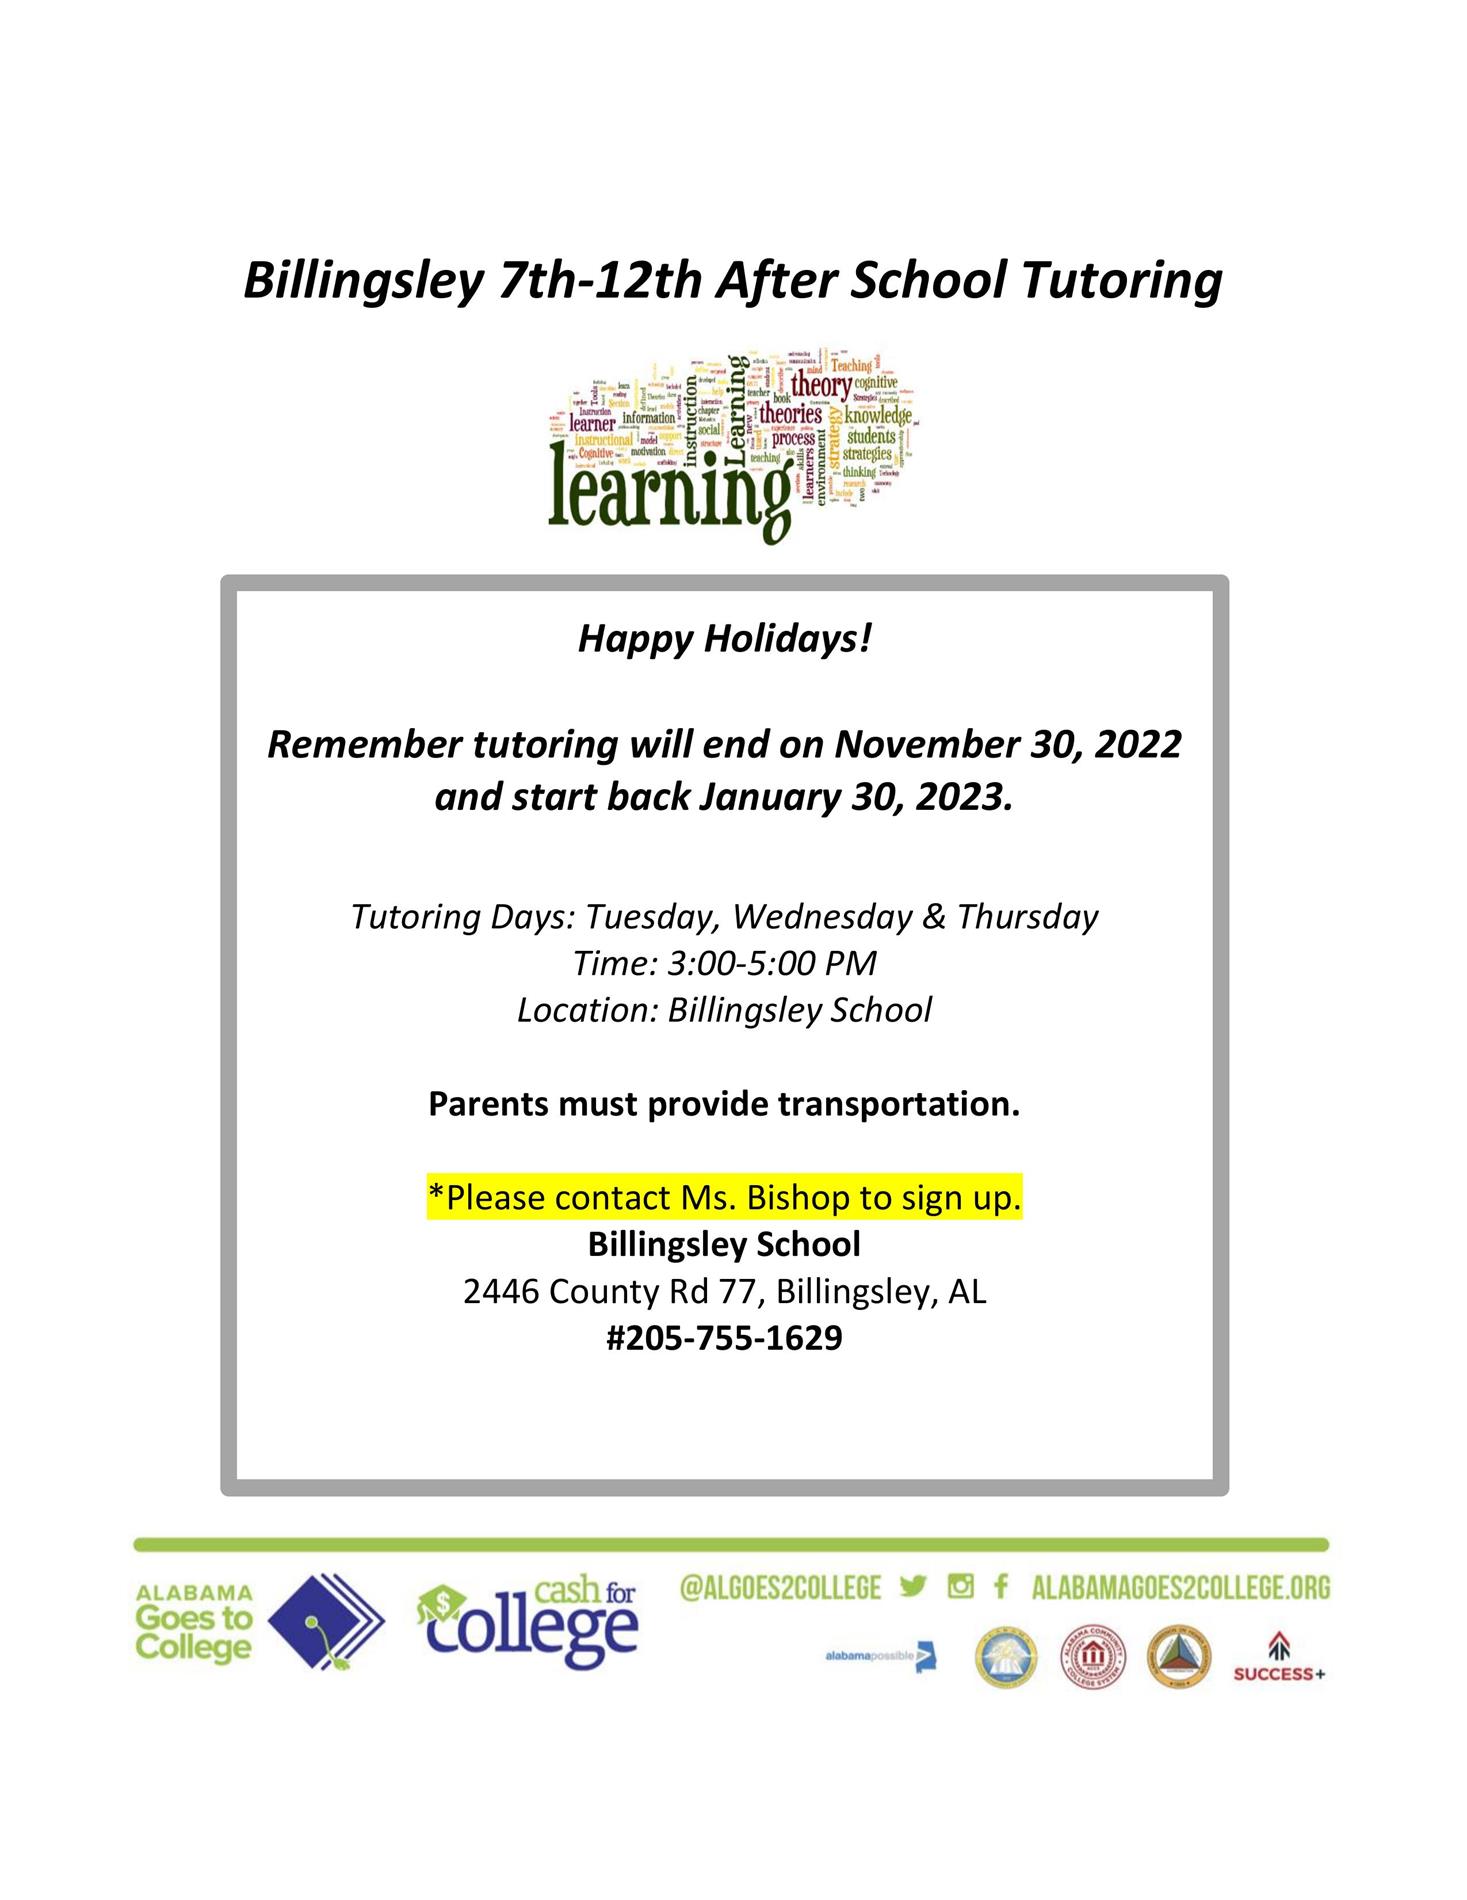 7th-12th after school tutoring, Remember tutoring will end on November 30, 2022 and start back January 30, 2023.  Tutoring Days: Tuesday, Wednesday & Thursday Time: 3:00-5:00 PM Location: Billingsley School  Parents must provide transportation.  Please contact Ms. Bishop to sign up. Billingsley School  2446 County Rd 77, Billingsley, AL 205-755-1629